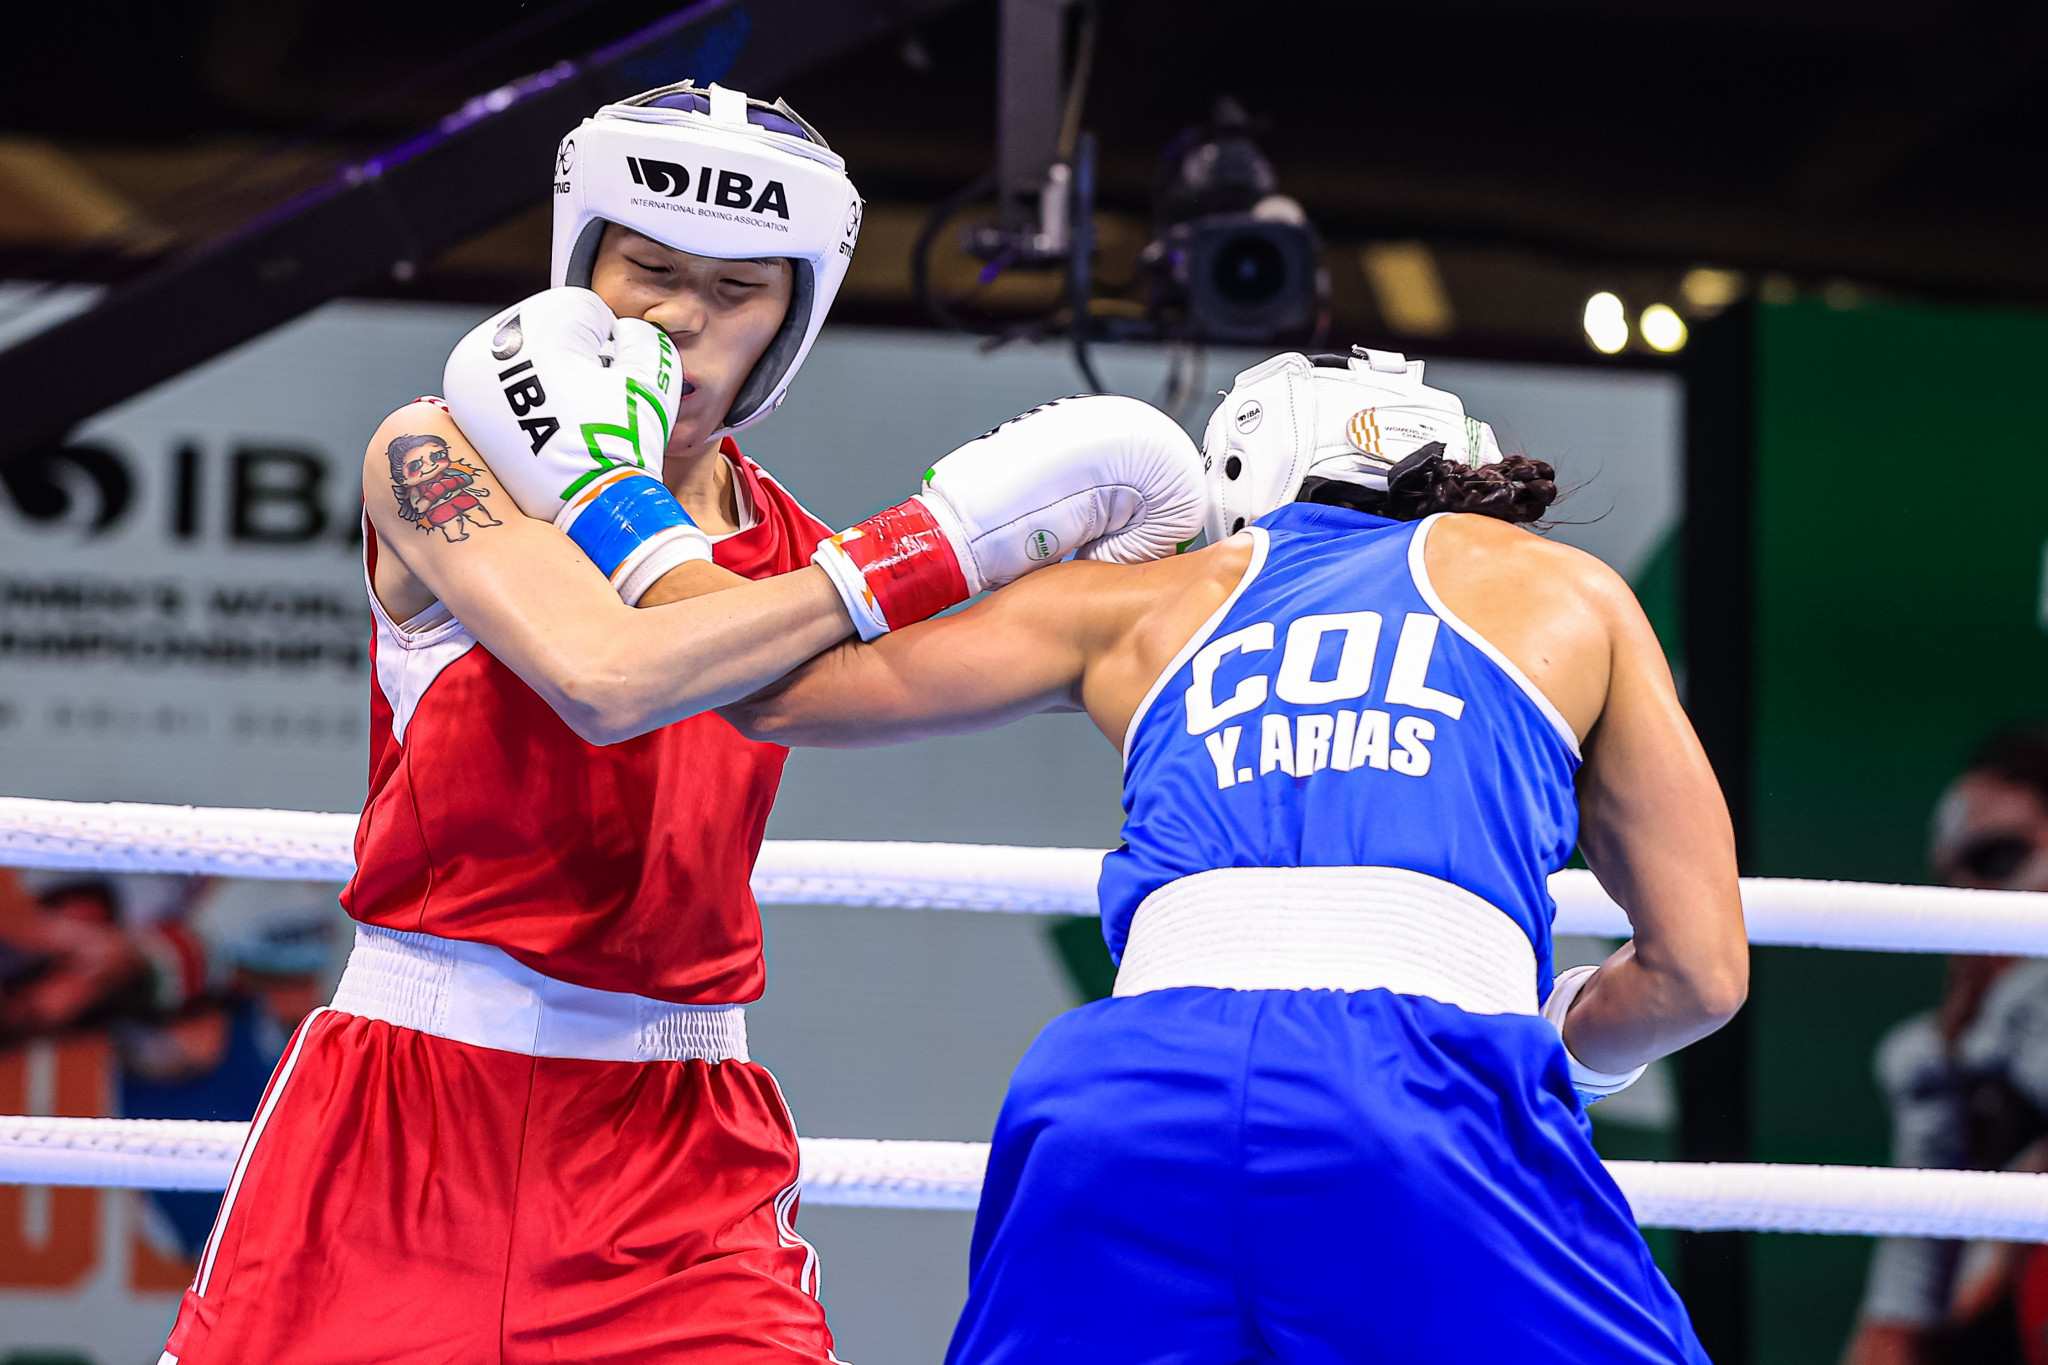 Colombia also had to settle for silver in the bantamweight category as Huang Hsiao-wen of Chinese Taipei saw off Yeni Arias in the final ©IBA